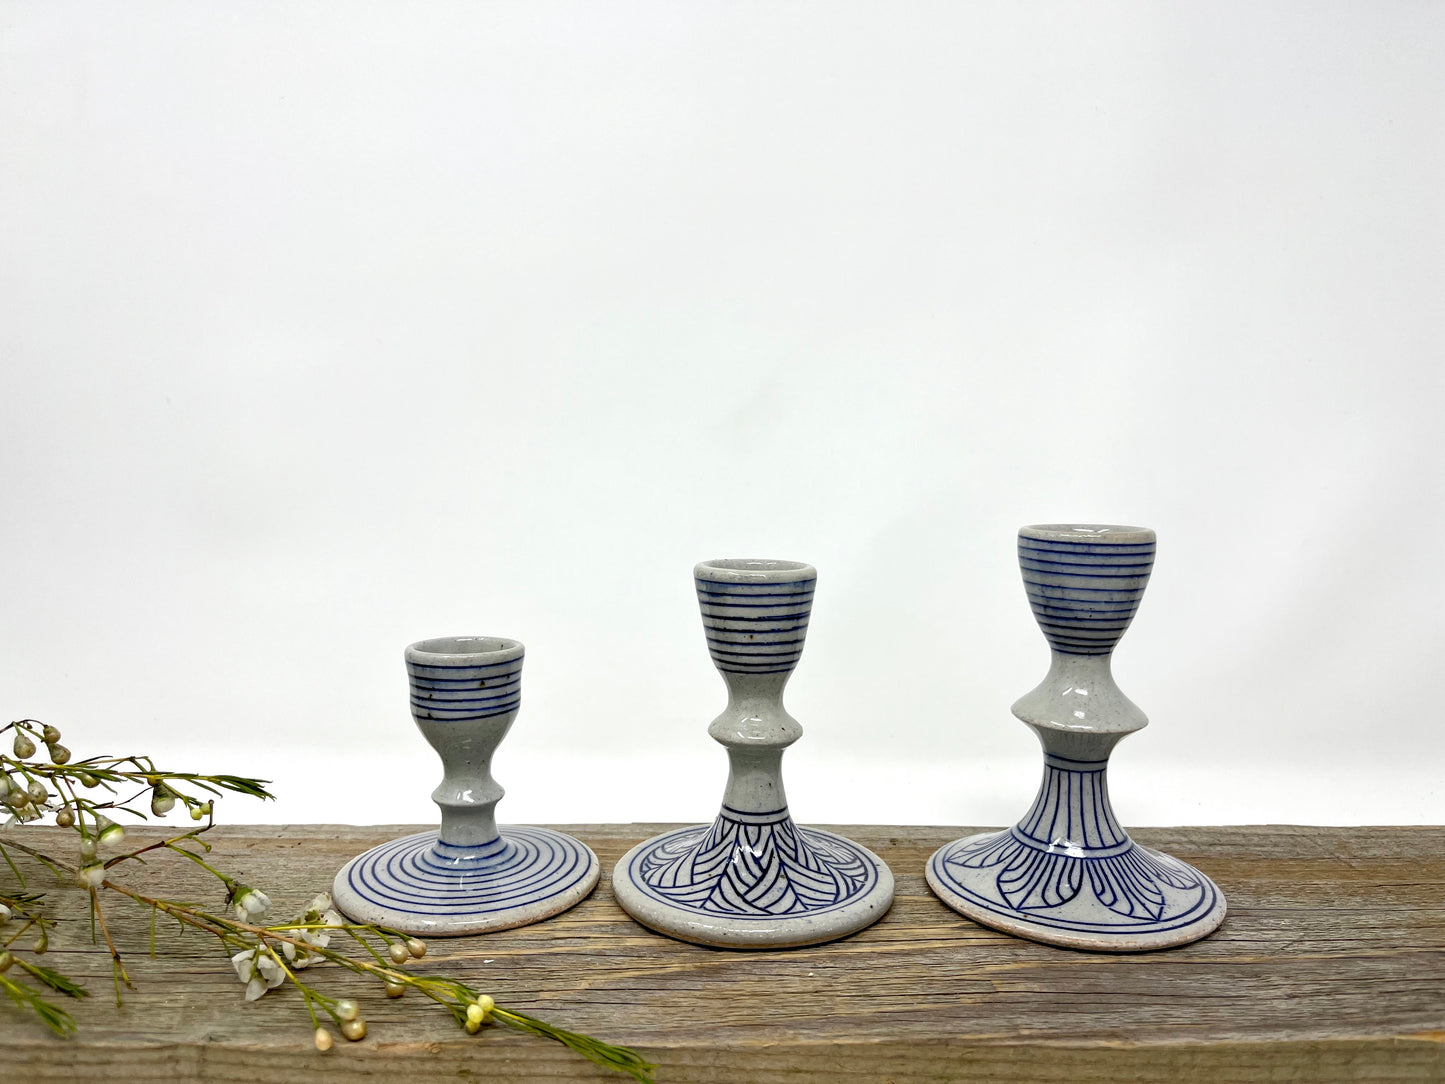 Set of Three Inlaid Candlesticks in Blue and Gray